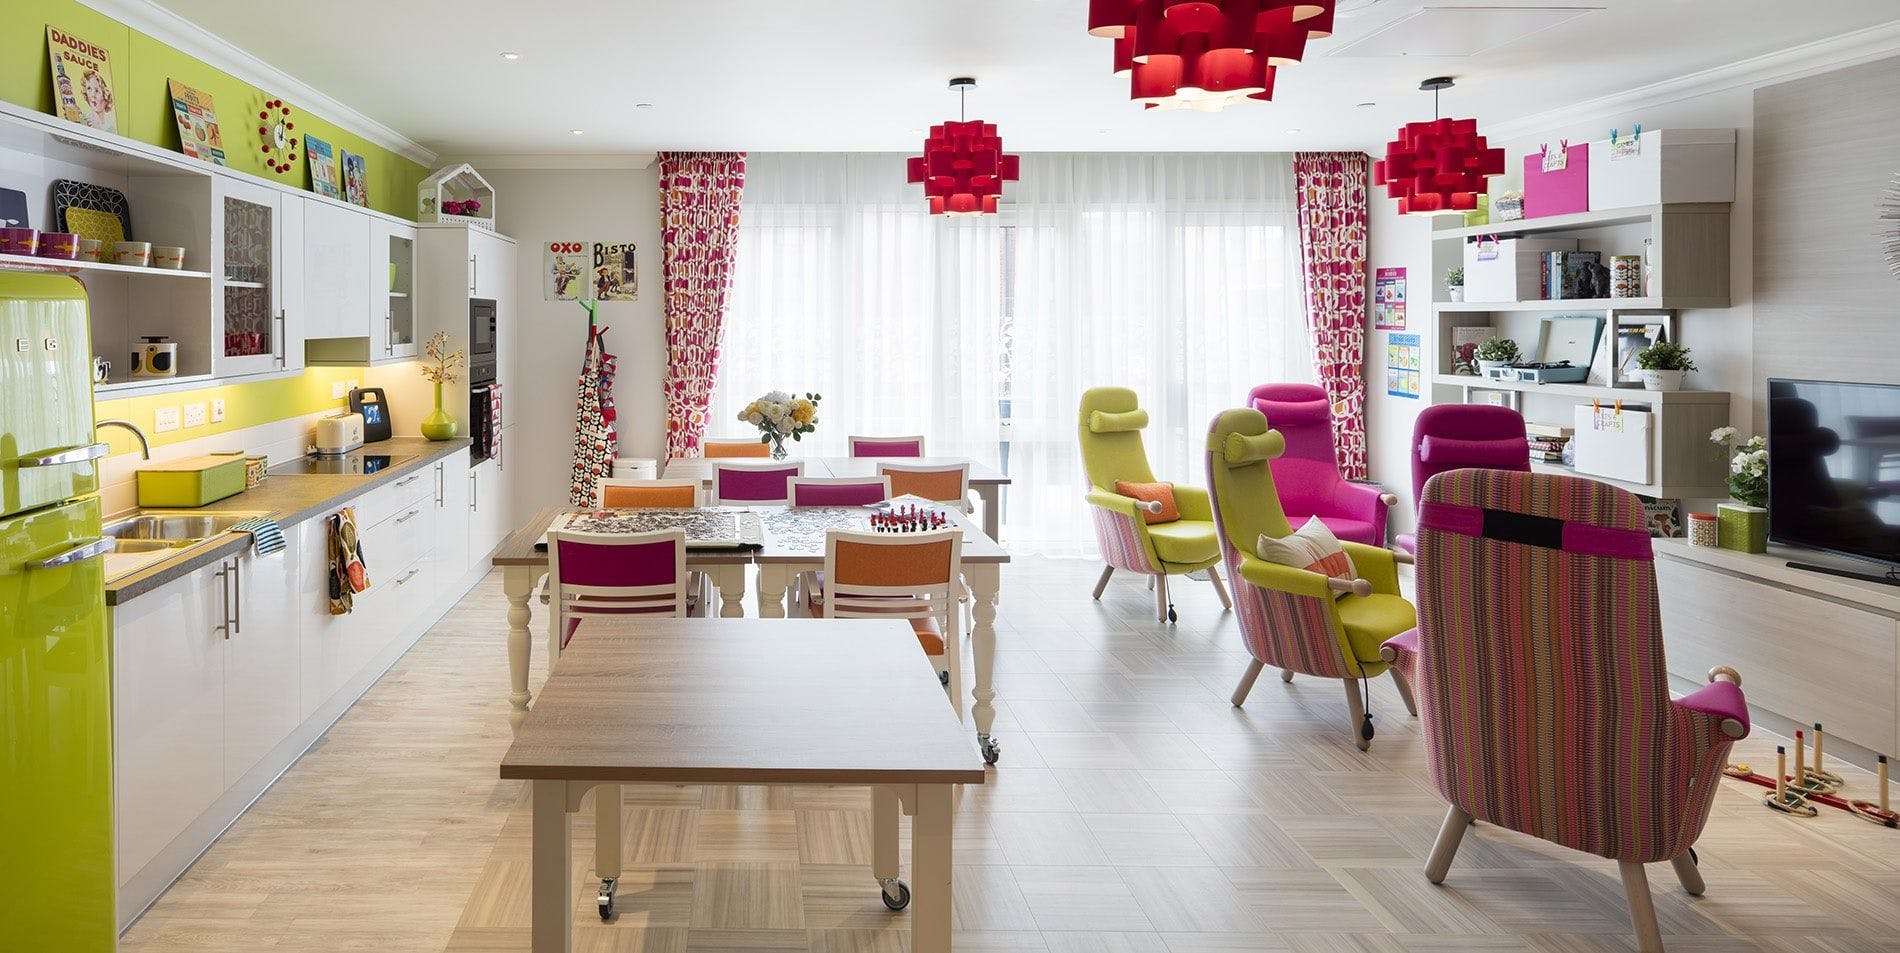 Salon at Camberley Heights Care Home in Camberley, Surrey